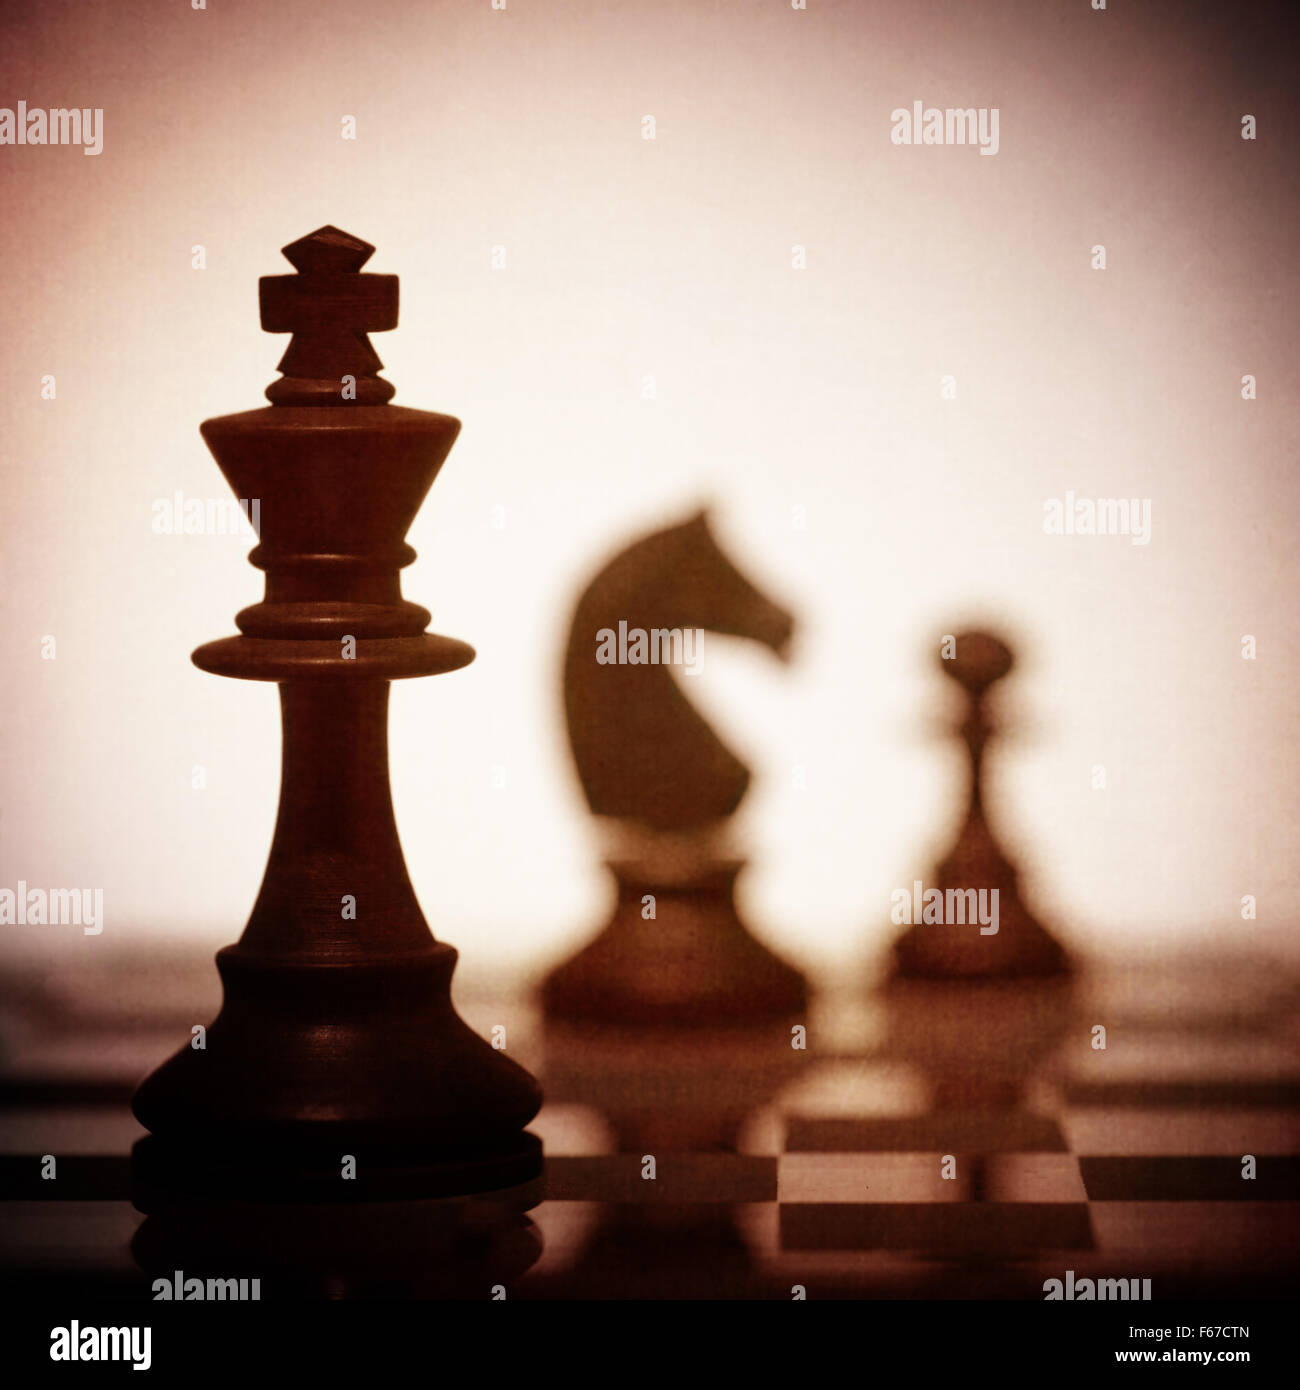 A close up of the King chess piece in silhouette with two other pieces in the background Stock Photo